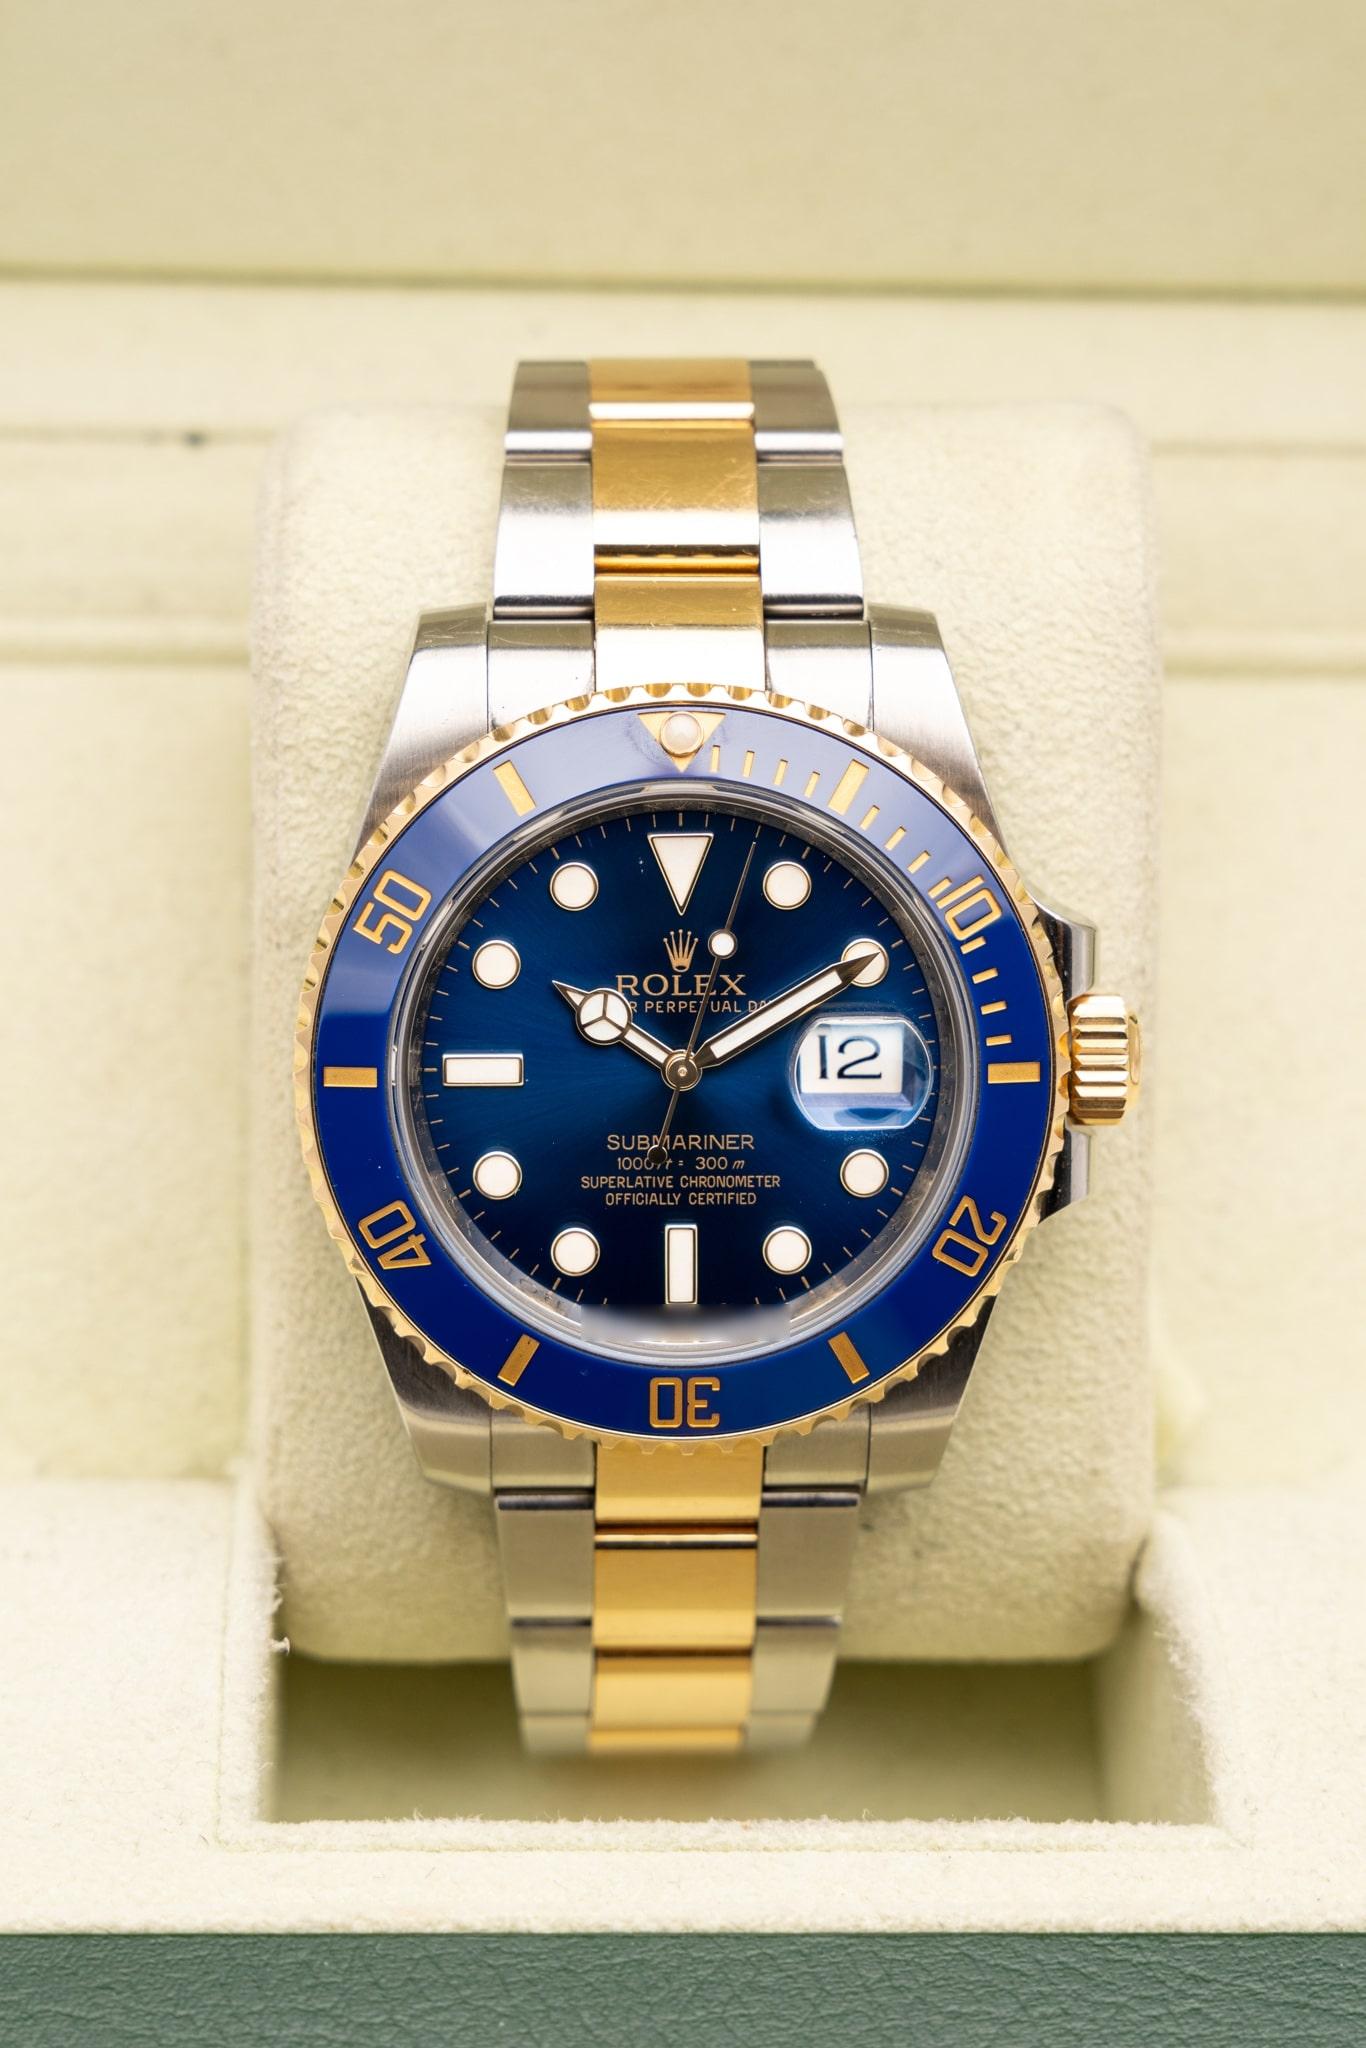 The Submariner's rotatable bezel is a key functionality of the watch. Its 60-minute graduations allow a diver to accurately and safely monitor diving time and decompression stops.
Manufactured by Rolex from a hard, corrosion-resistant ceramic, the